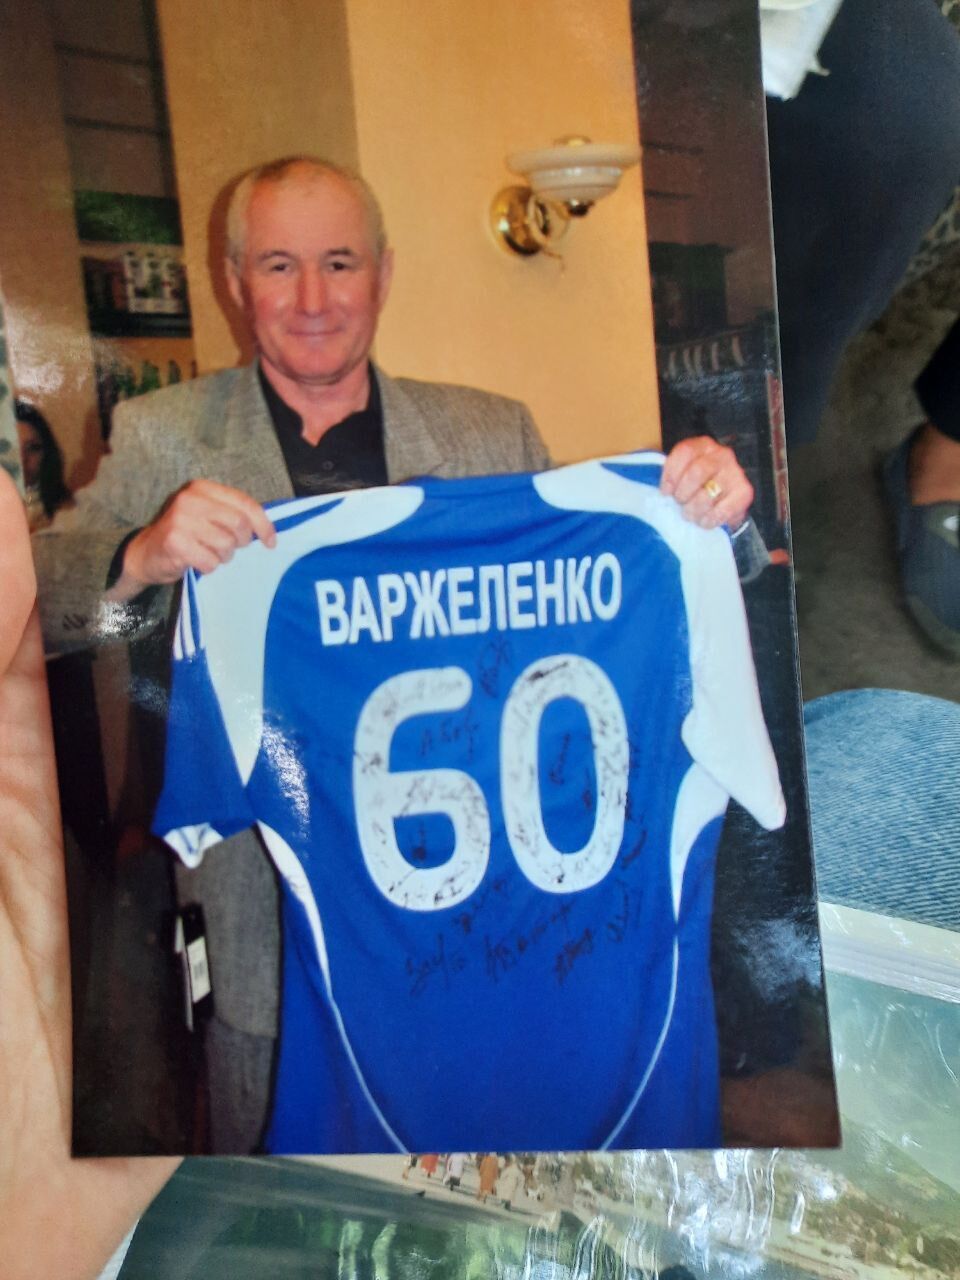 A famous Ukrainian coach who played for Dynamo and was captain of the USSR national team has died